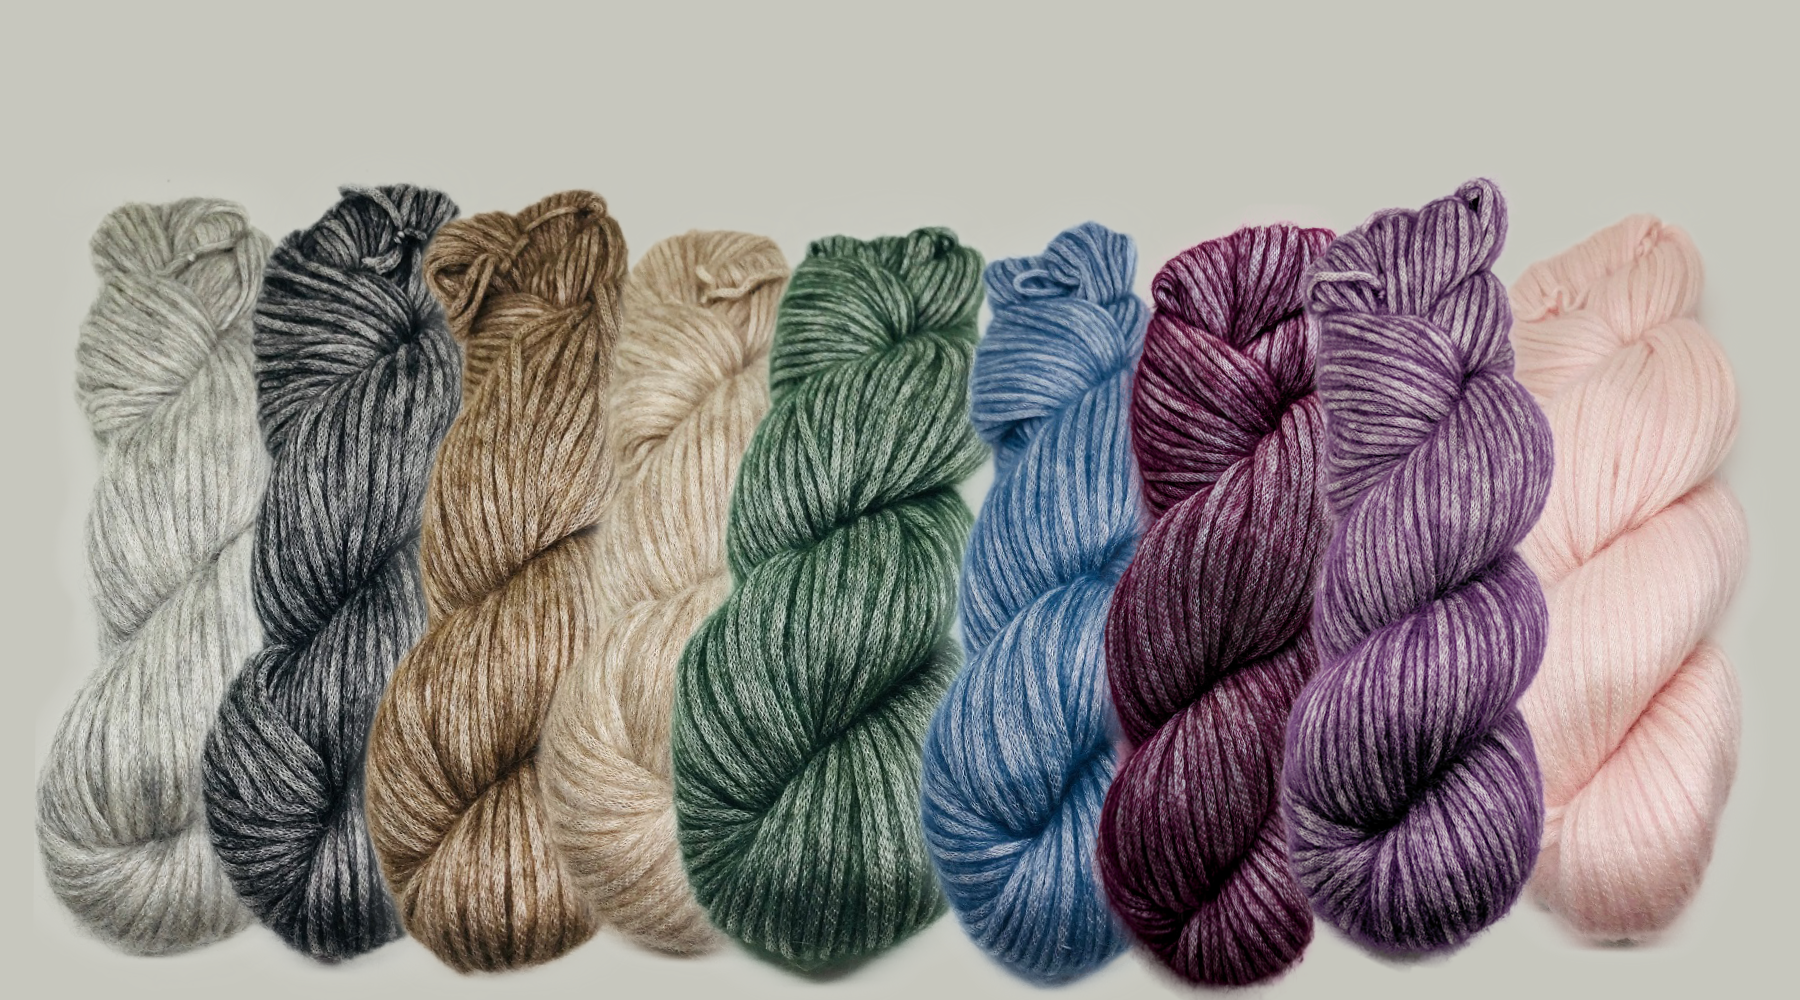 Yarn review - Amelie by Illimani - Crazy for Ewe